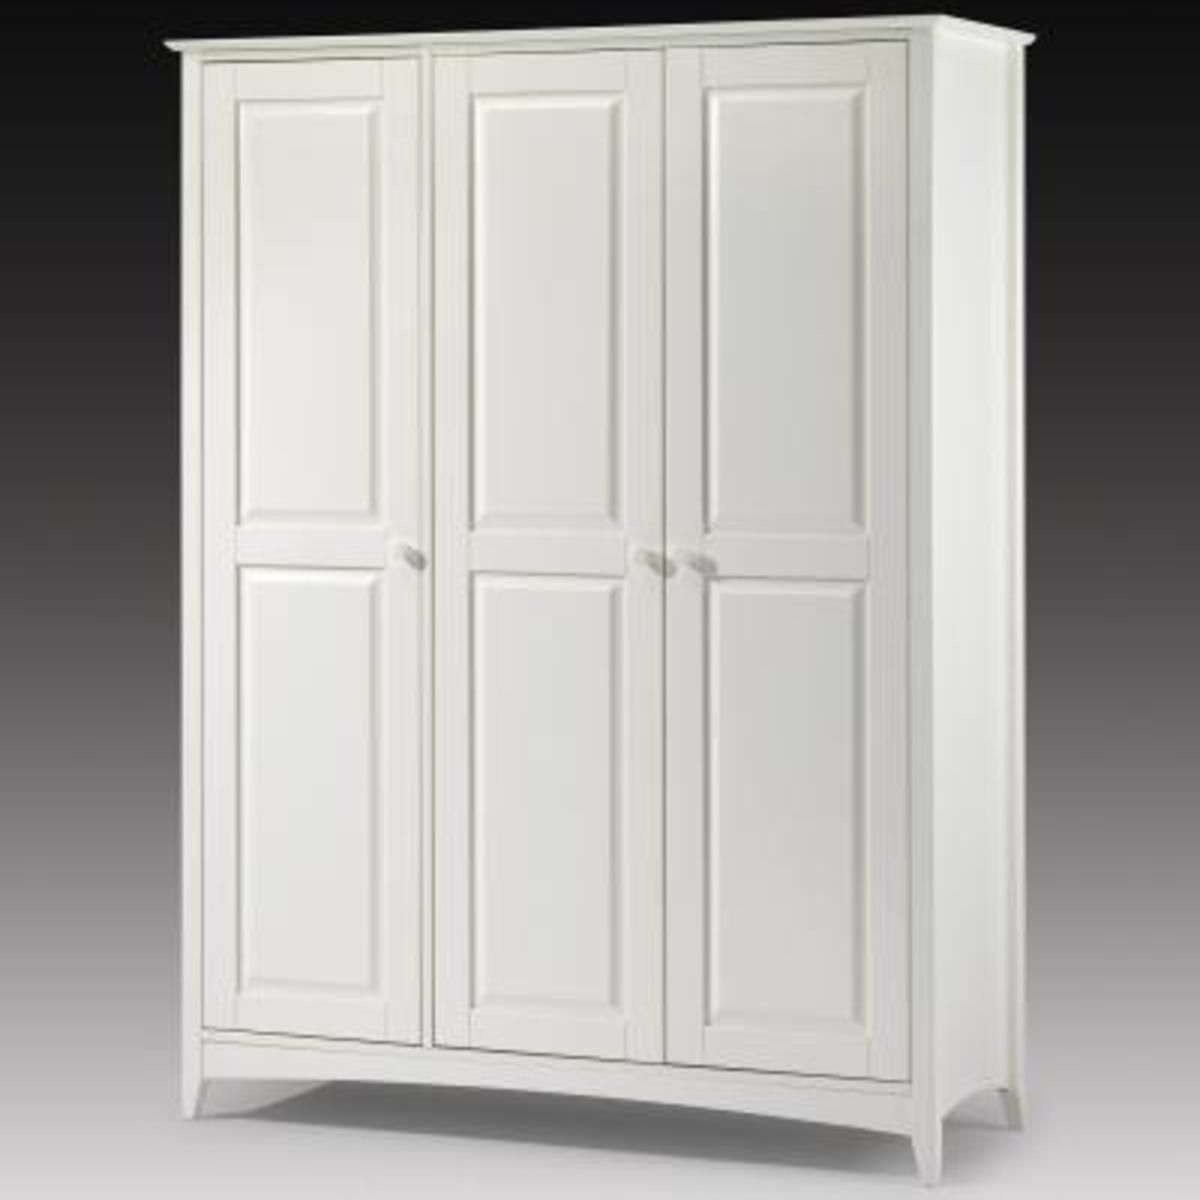 Affordable Wardrobe In White Lacquer |2 Door Wardrobe | Robinsons Beds With 3 Door White Wardrobes (Gallery 16 of 20)